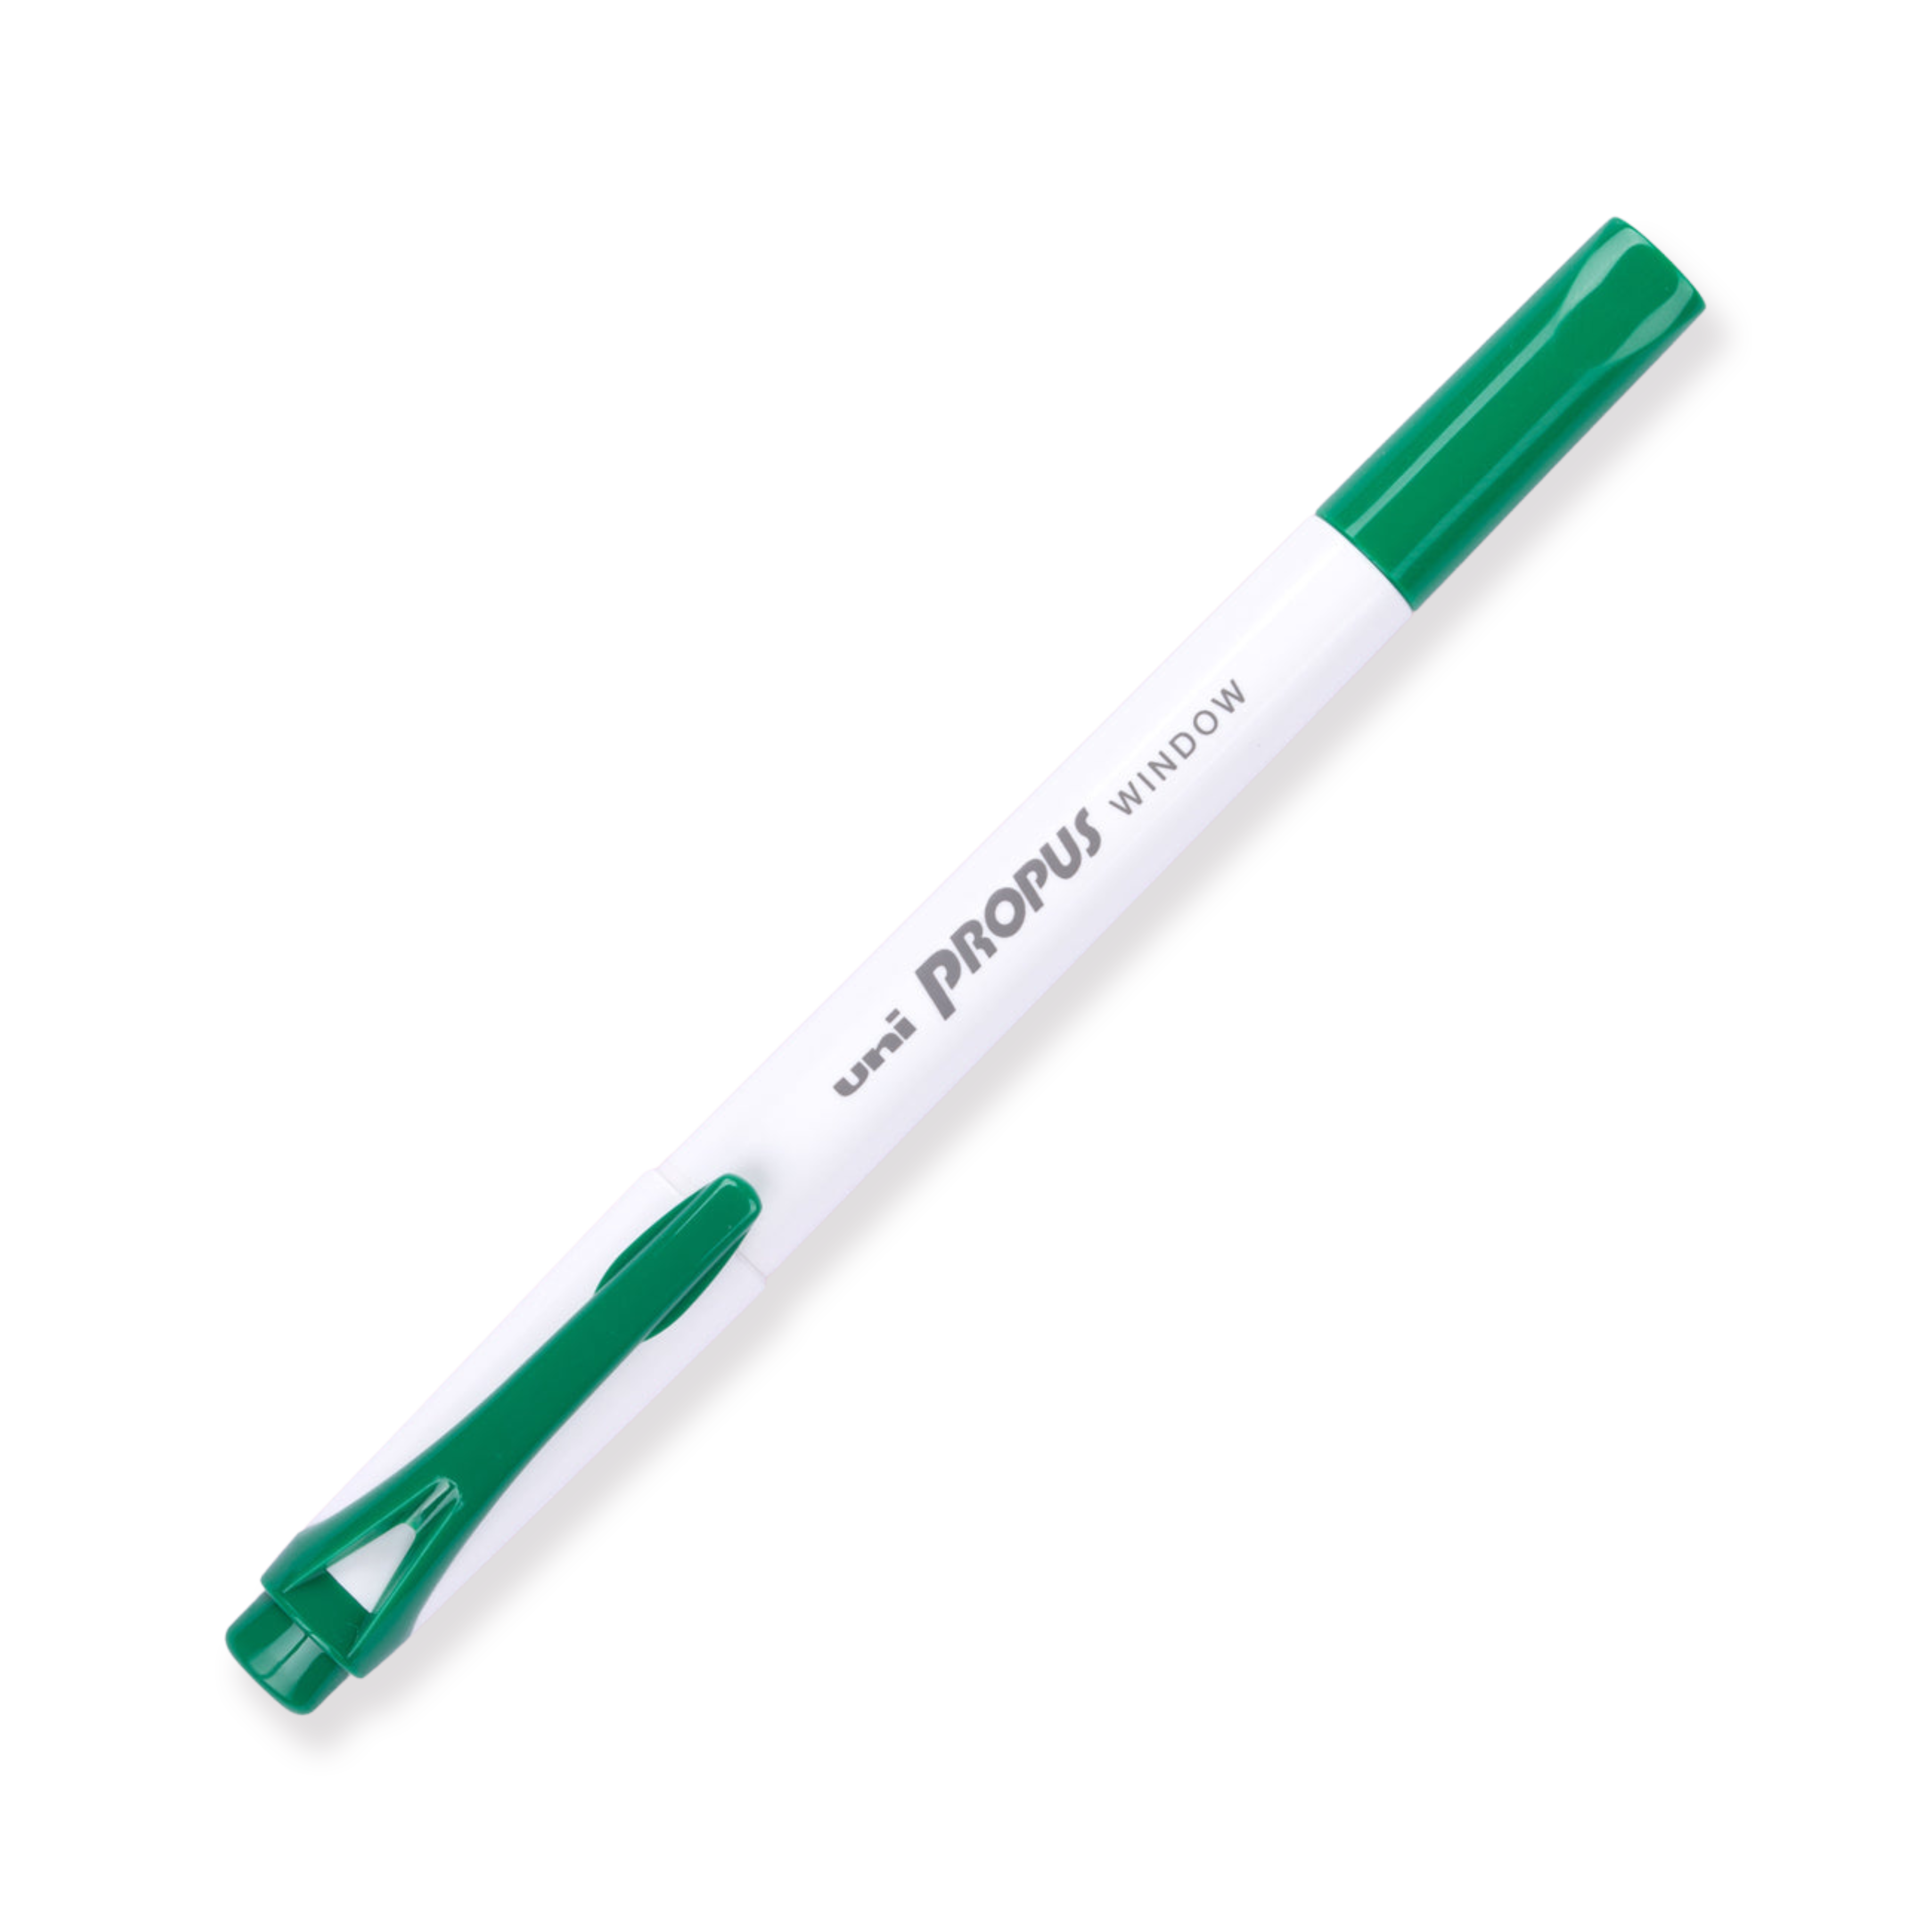 Uni Propus Window Double-Sided Highlighter - Green - 2020 New Color